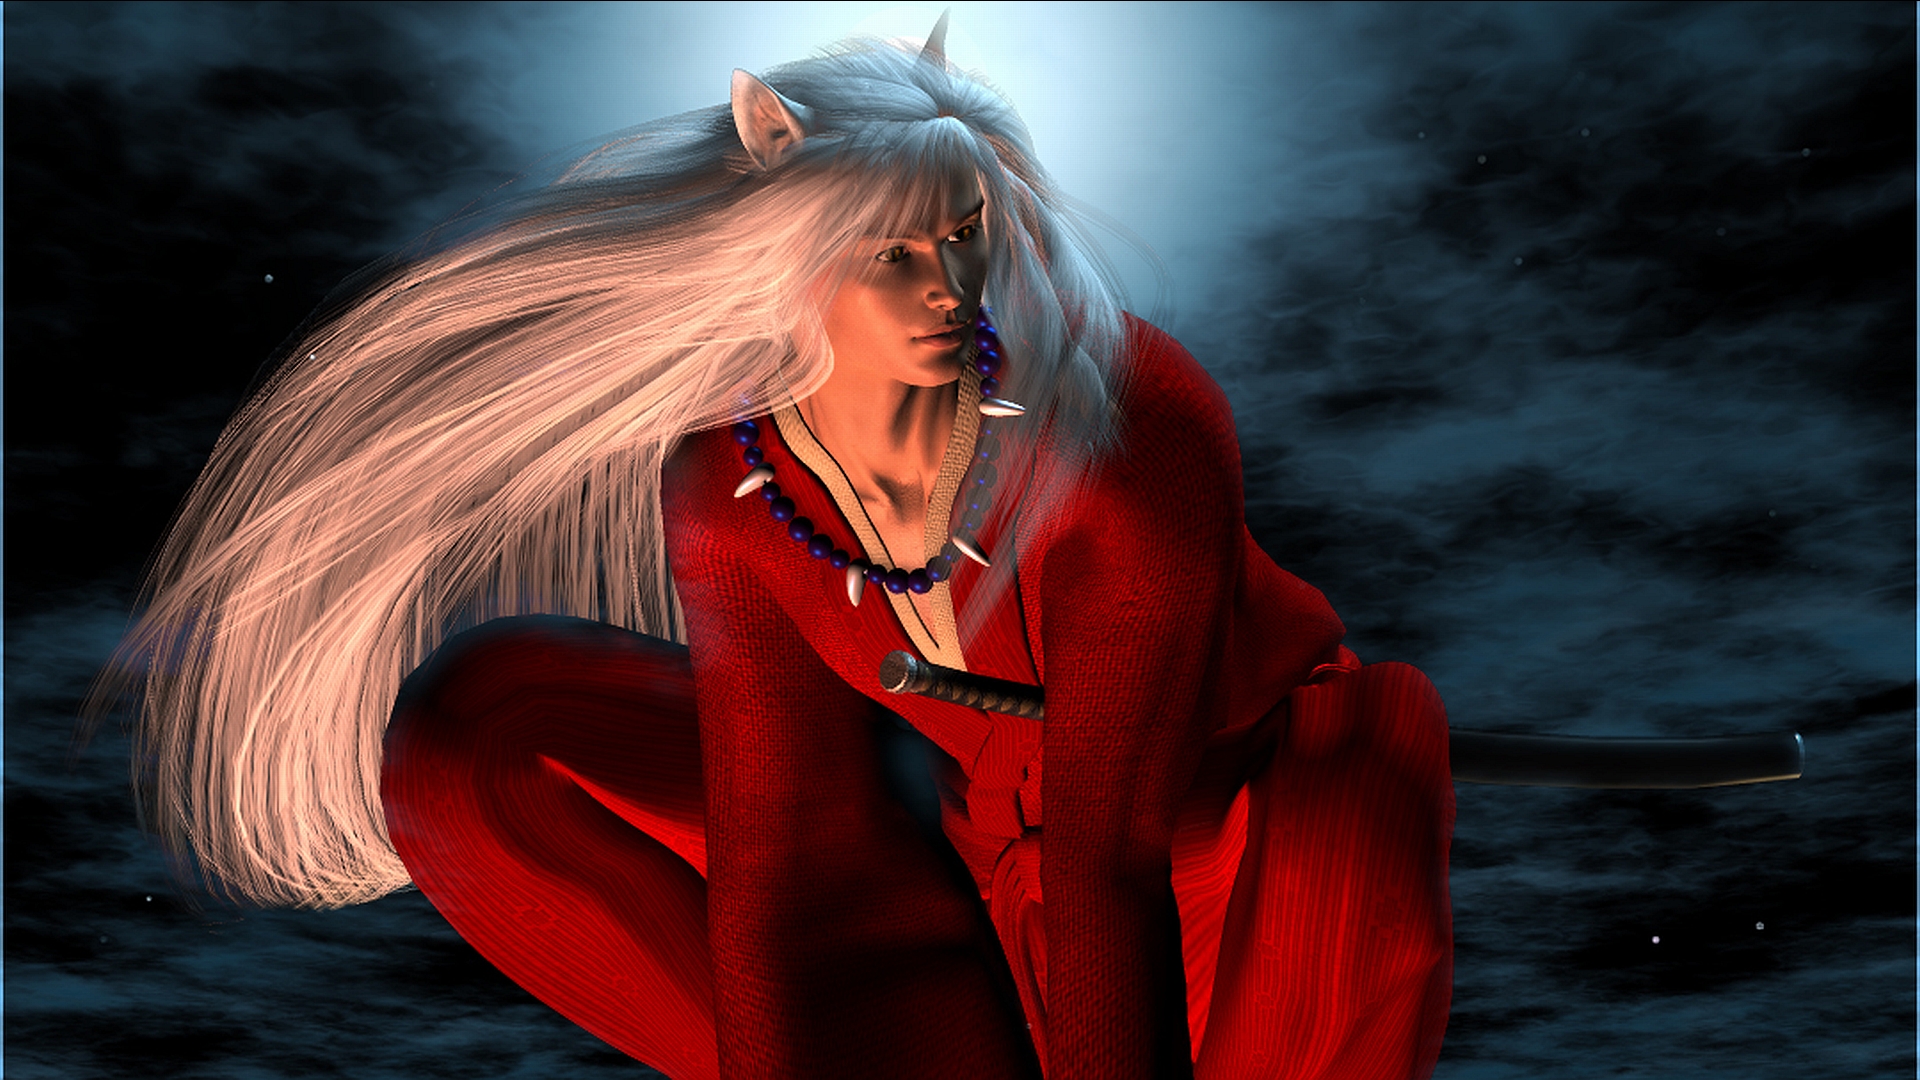 inuyasha wallpaper,red,beauty,blond,fashion,outerwear